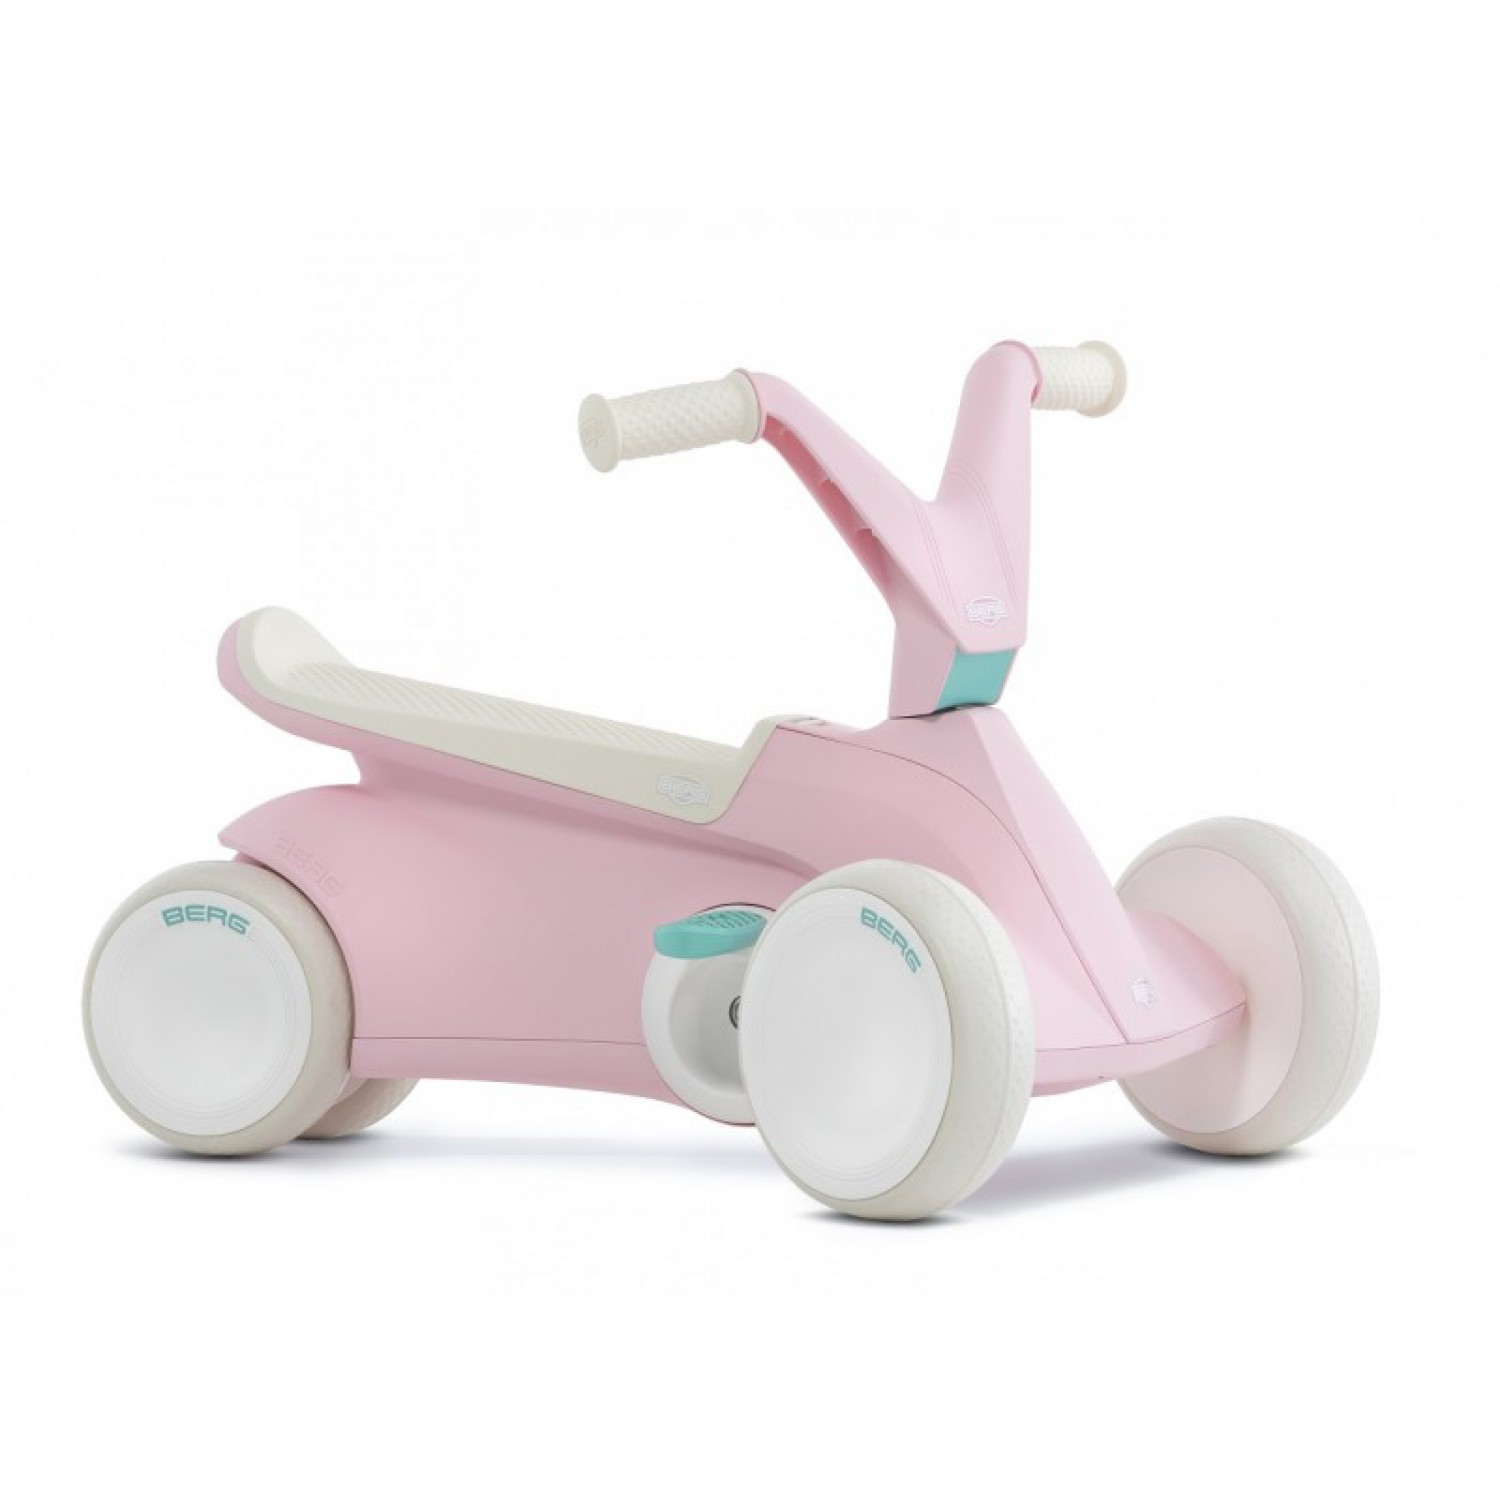 Berg Toys Pedal-scooter In Rosa 24.50.01.00 von Berg Toys